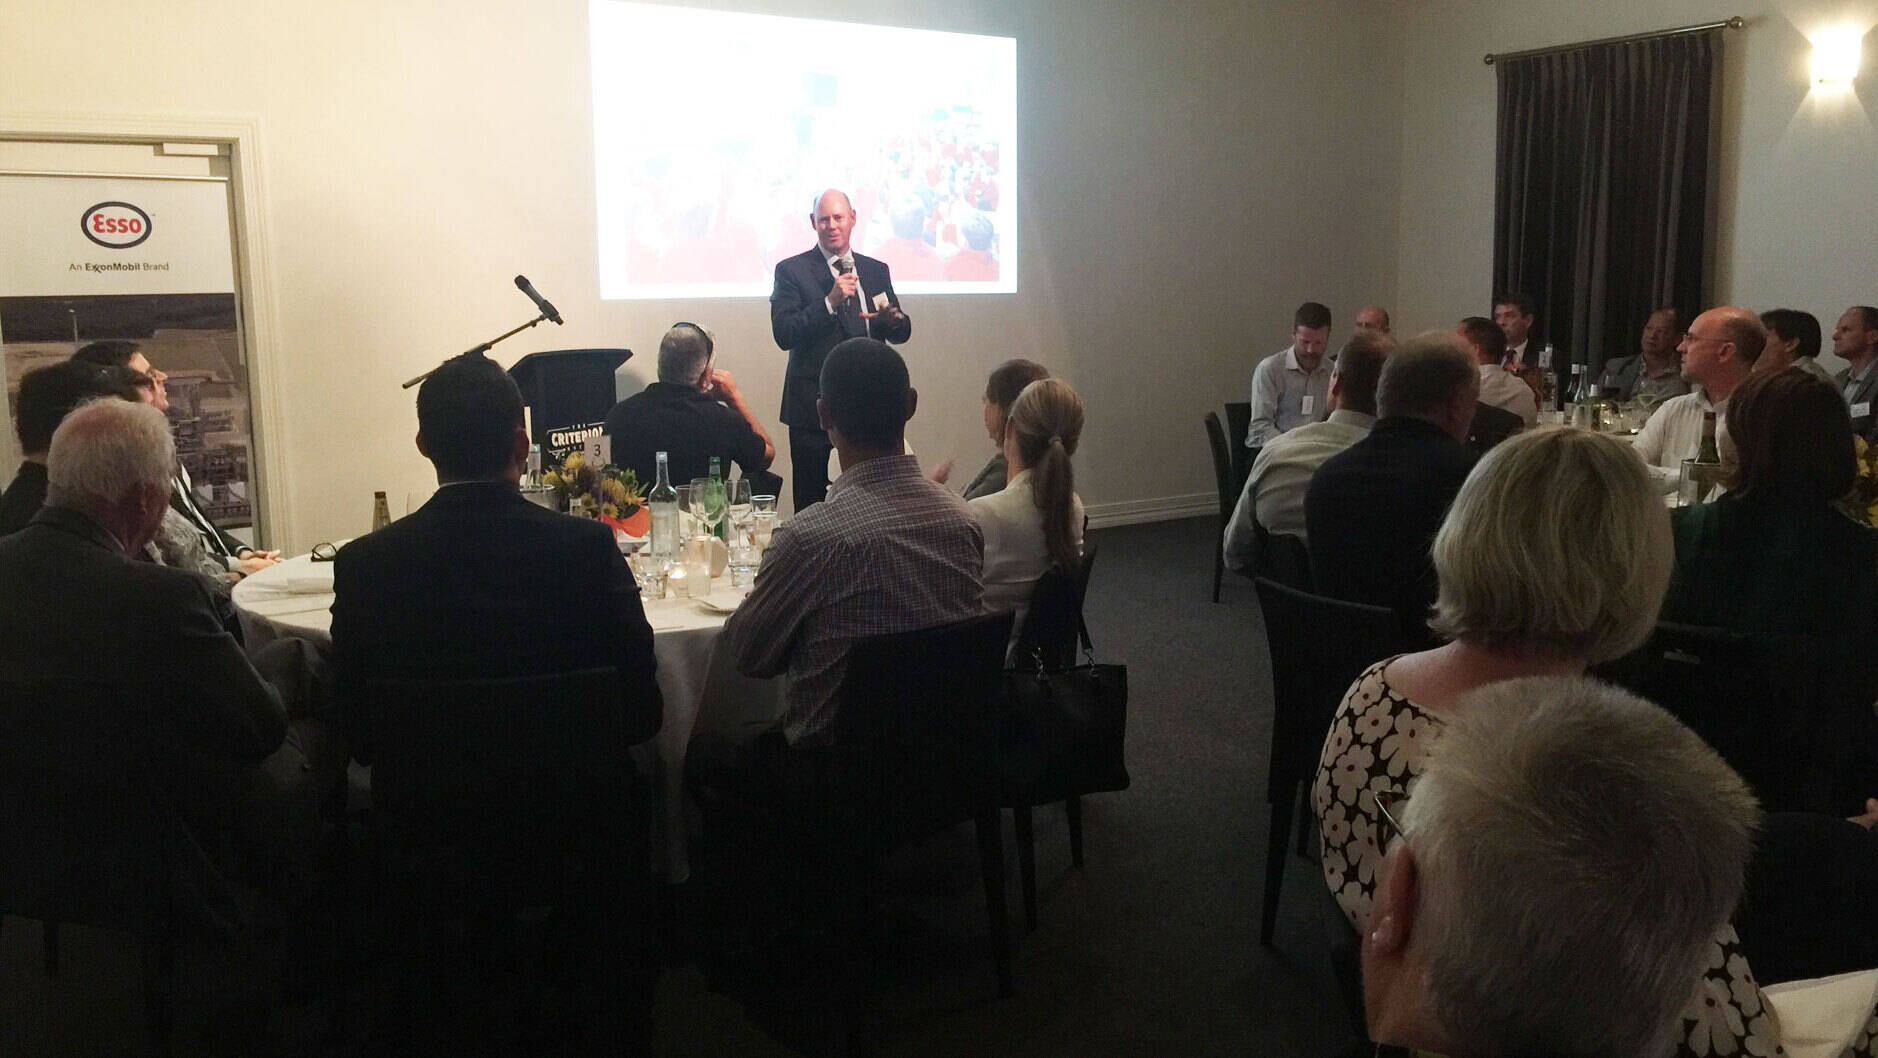 Image Photo Offshore Operations Manager Geoff Humphreys speaks at the Gippsland community dinner.